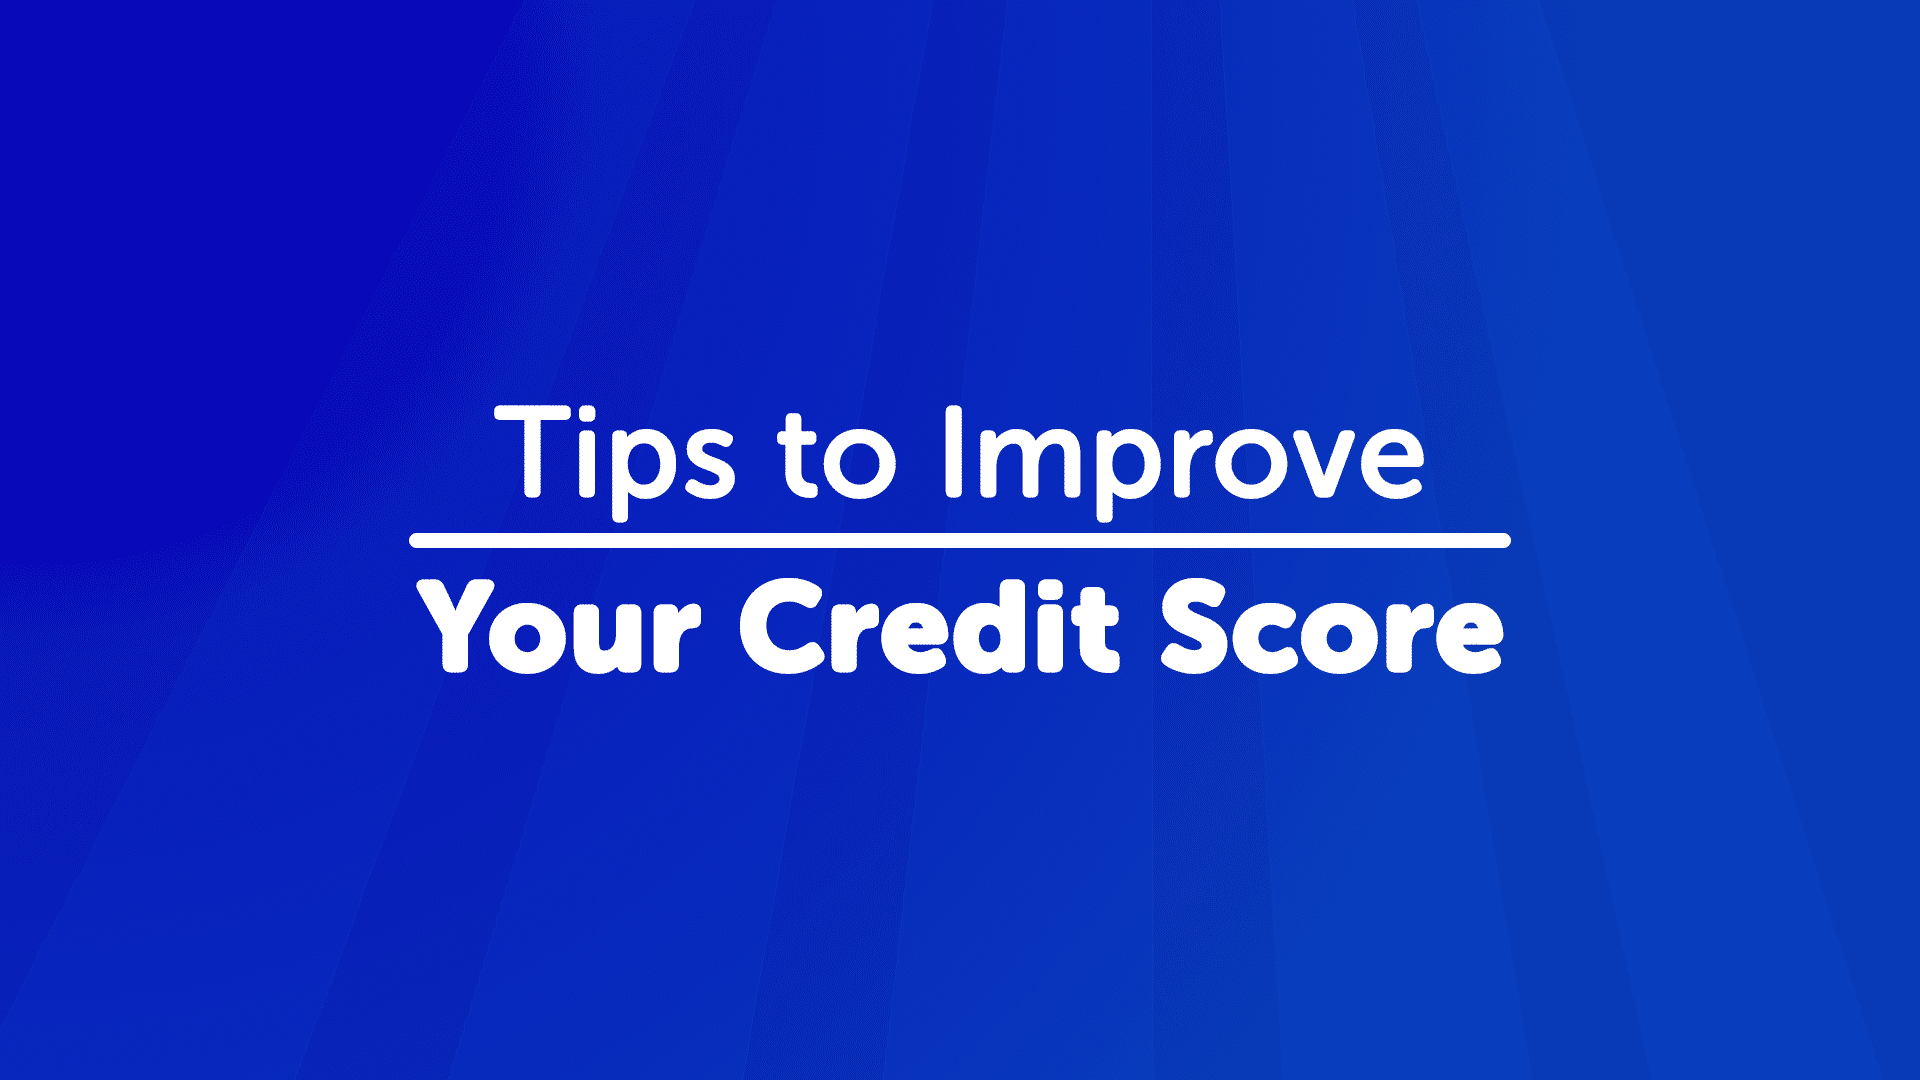 Tips to Improve Your Credit Score in Manchester